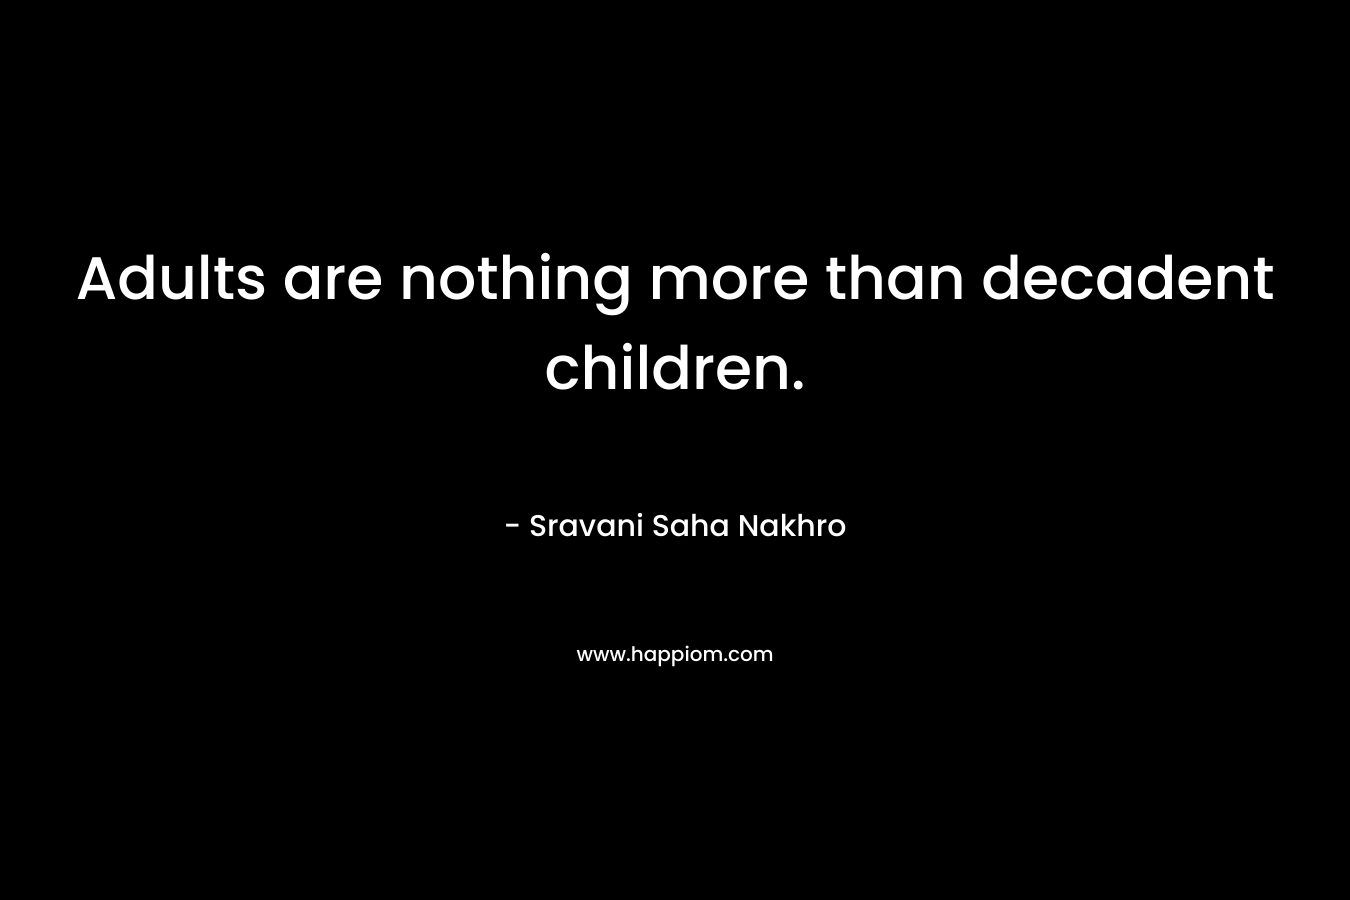 Adults are nothing more than decadent children.